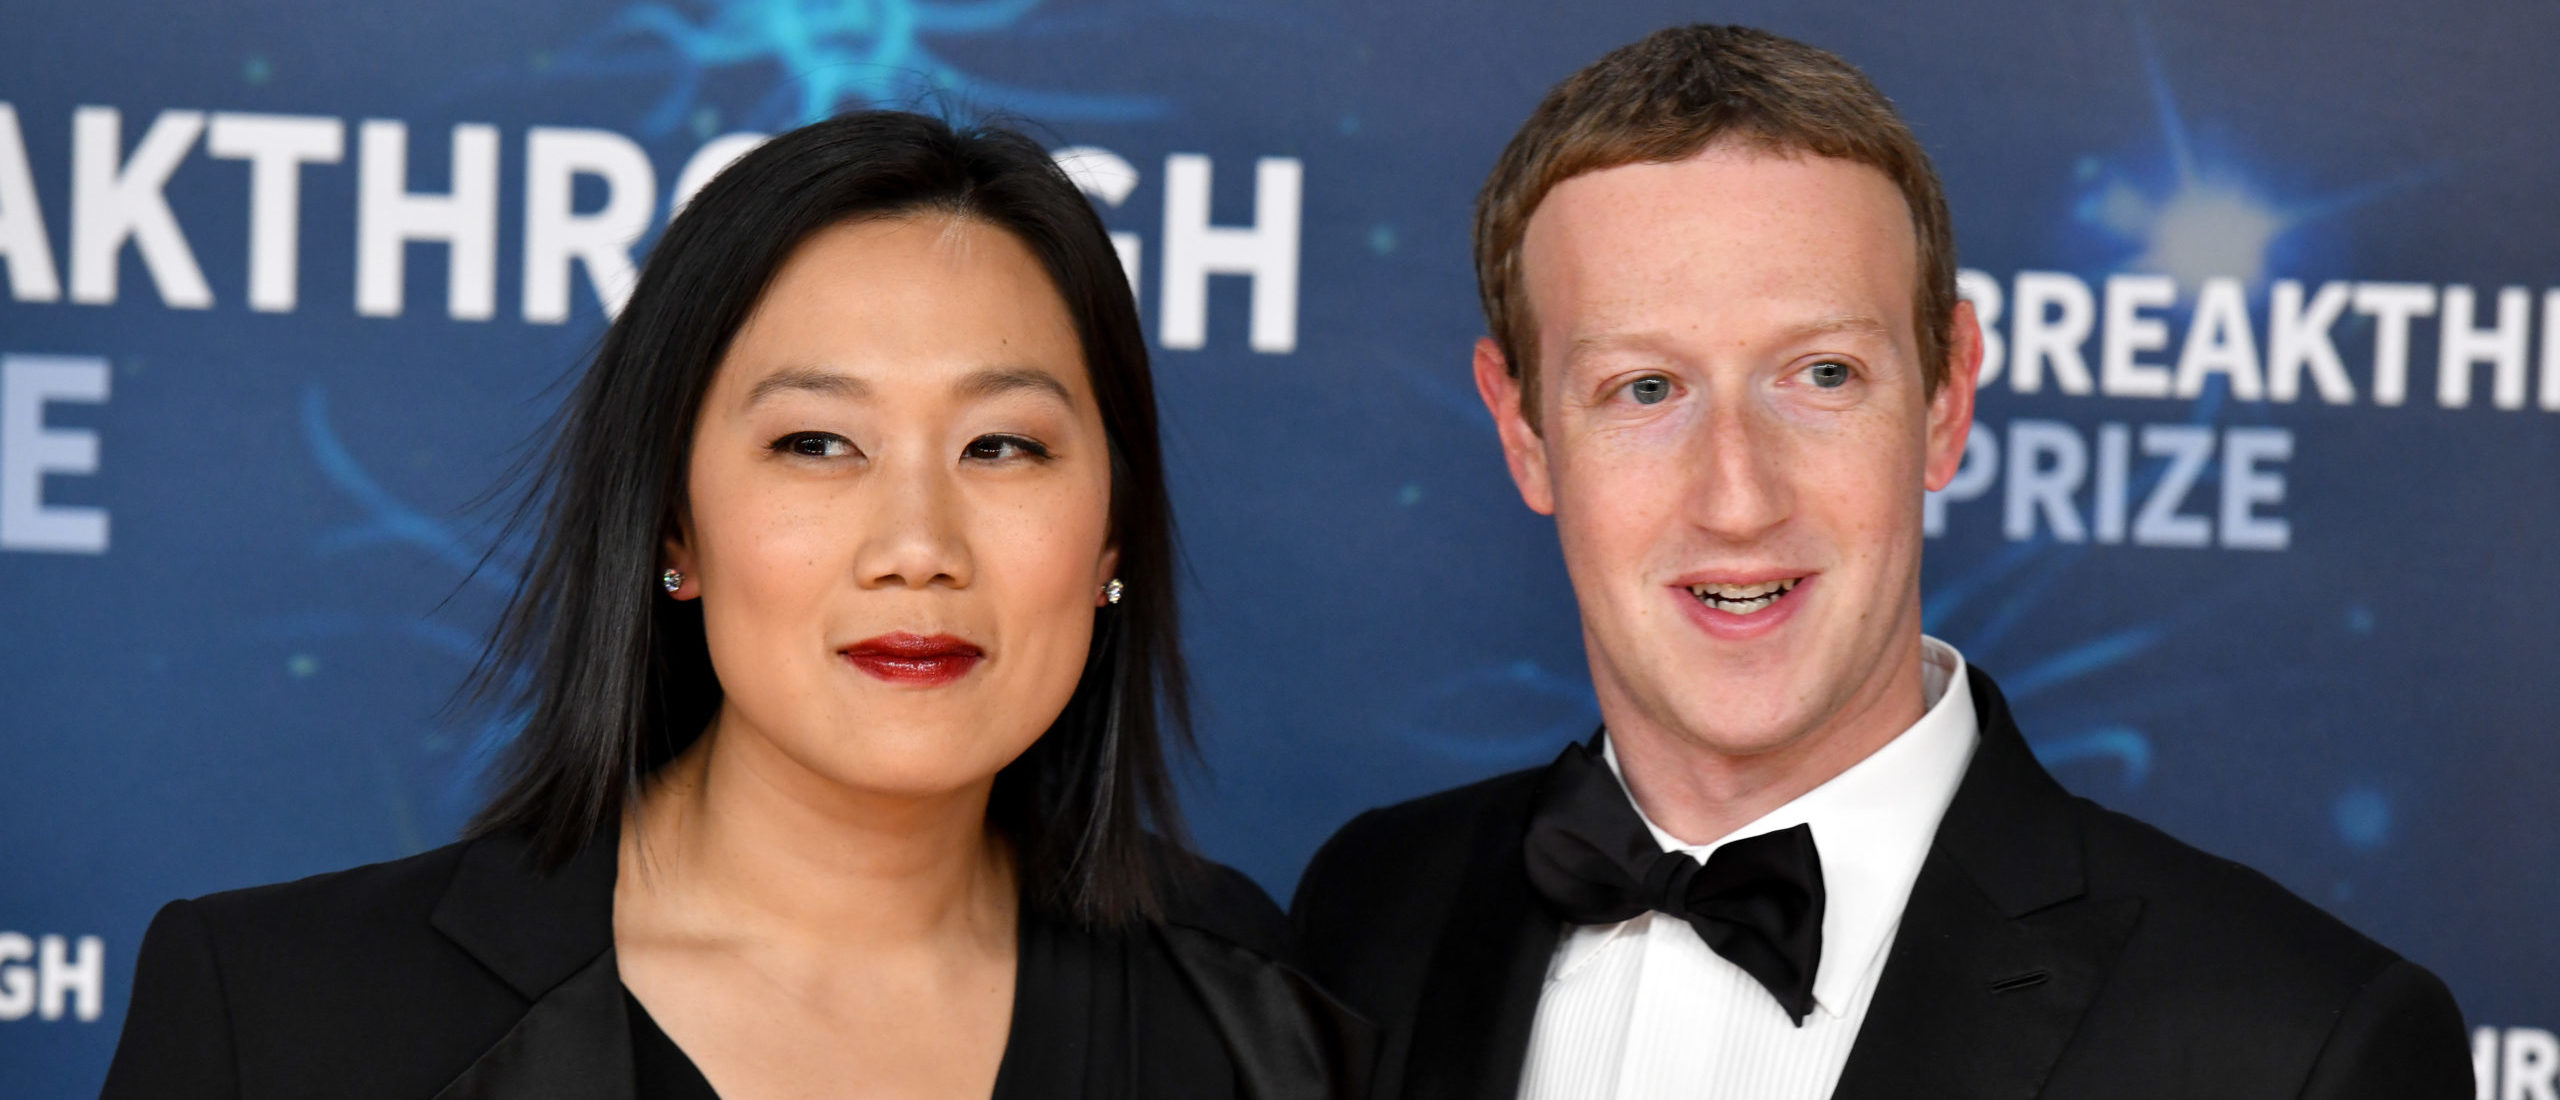 Priscilla Chan and Mark Zuckerberg attend the 2020 Breakthrough Prize Red Carpet at NASA Ames Research Center on November 03, 2019 in Mountain View, California. (Photo by Ian Tuttle/Getty Images for Breakthrough Prize )